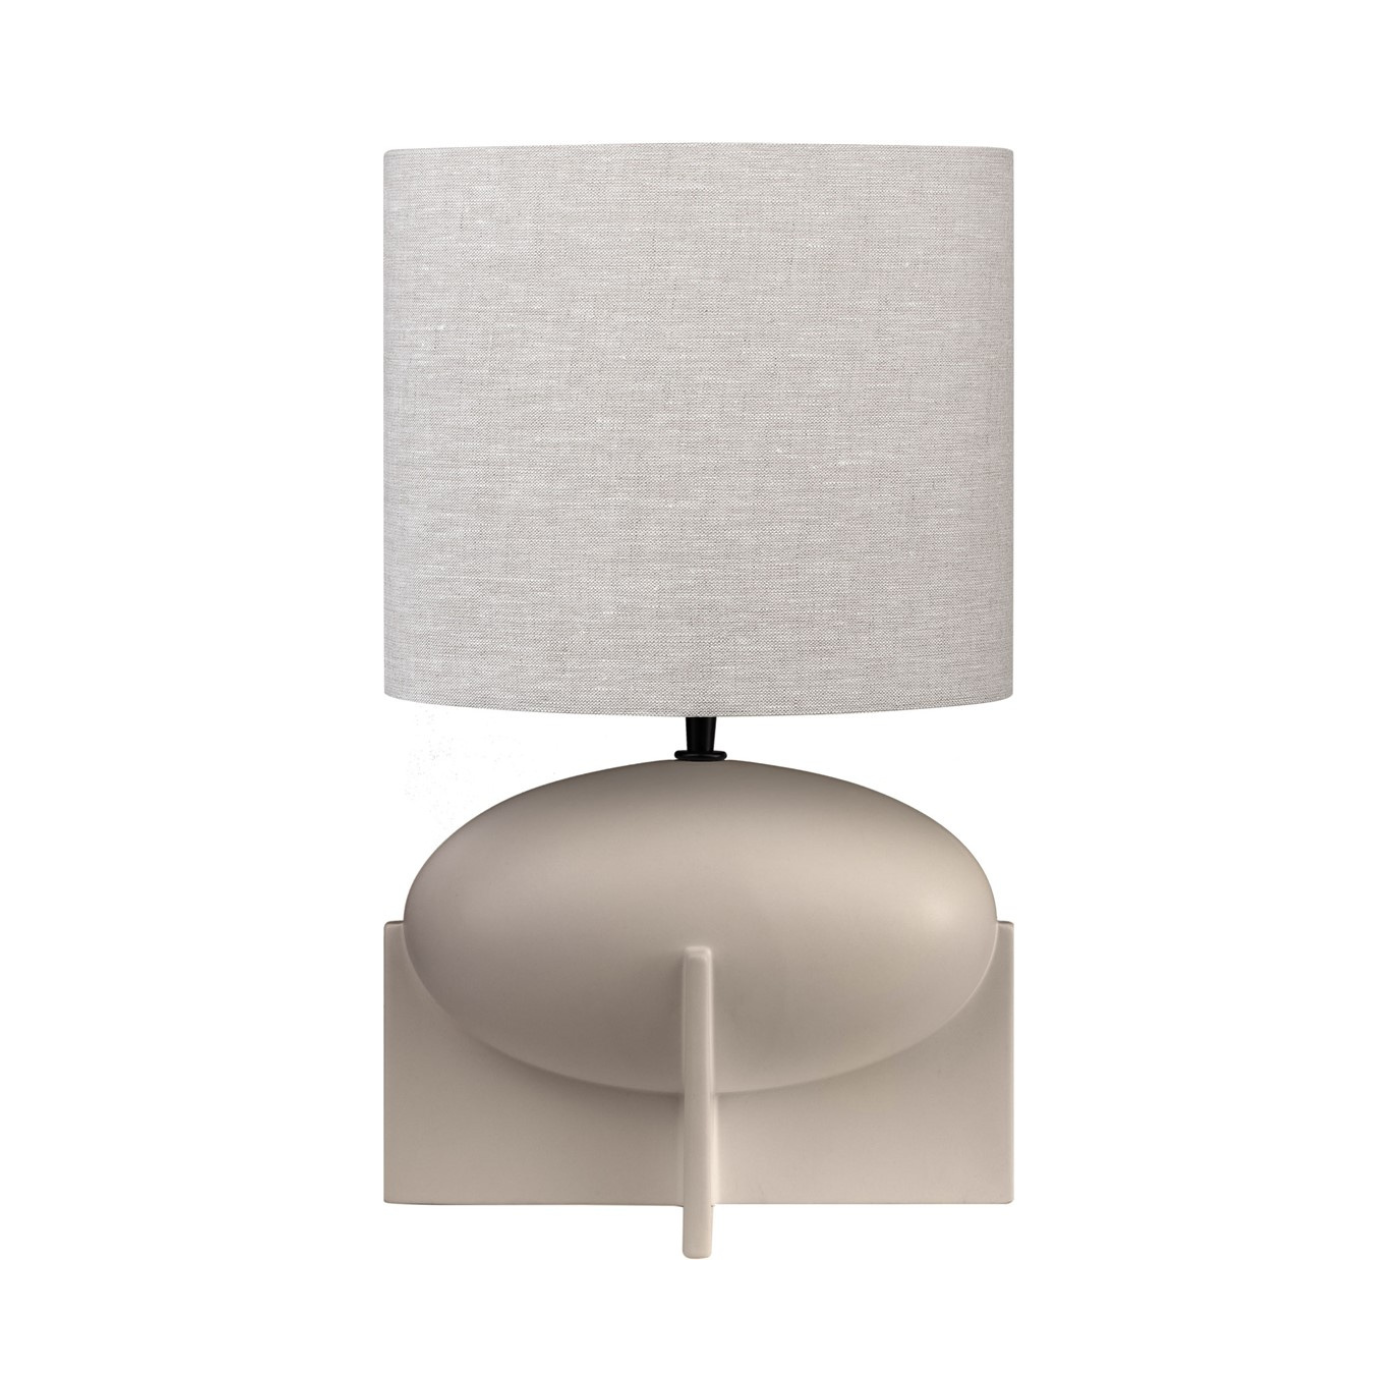 OVO 1 Earthenware Table Lamp with Shade